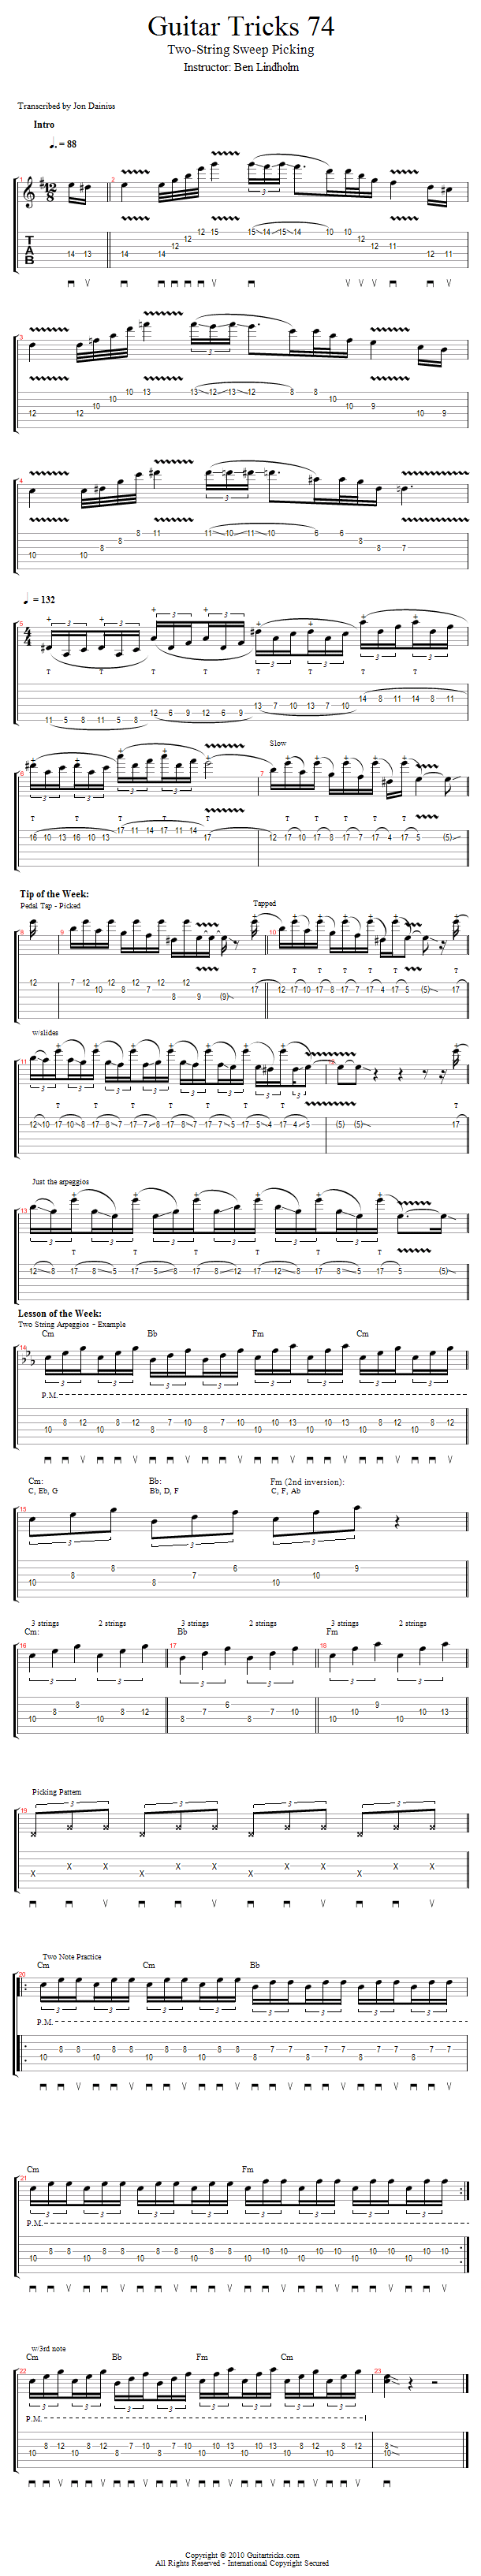 Guitar Tricks 74: 2-String Sweeps song notation